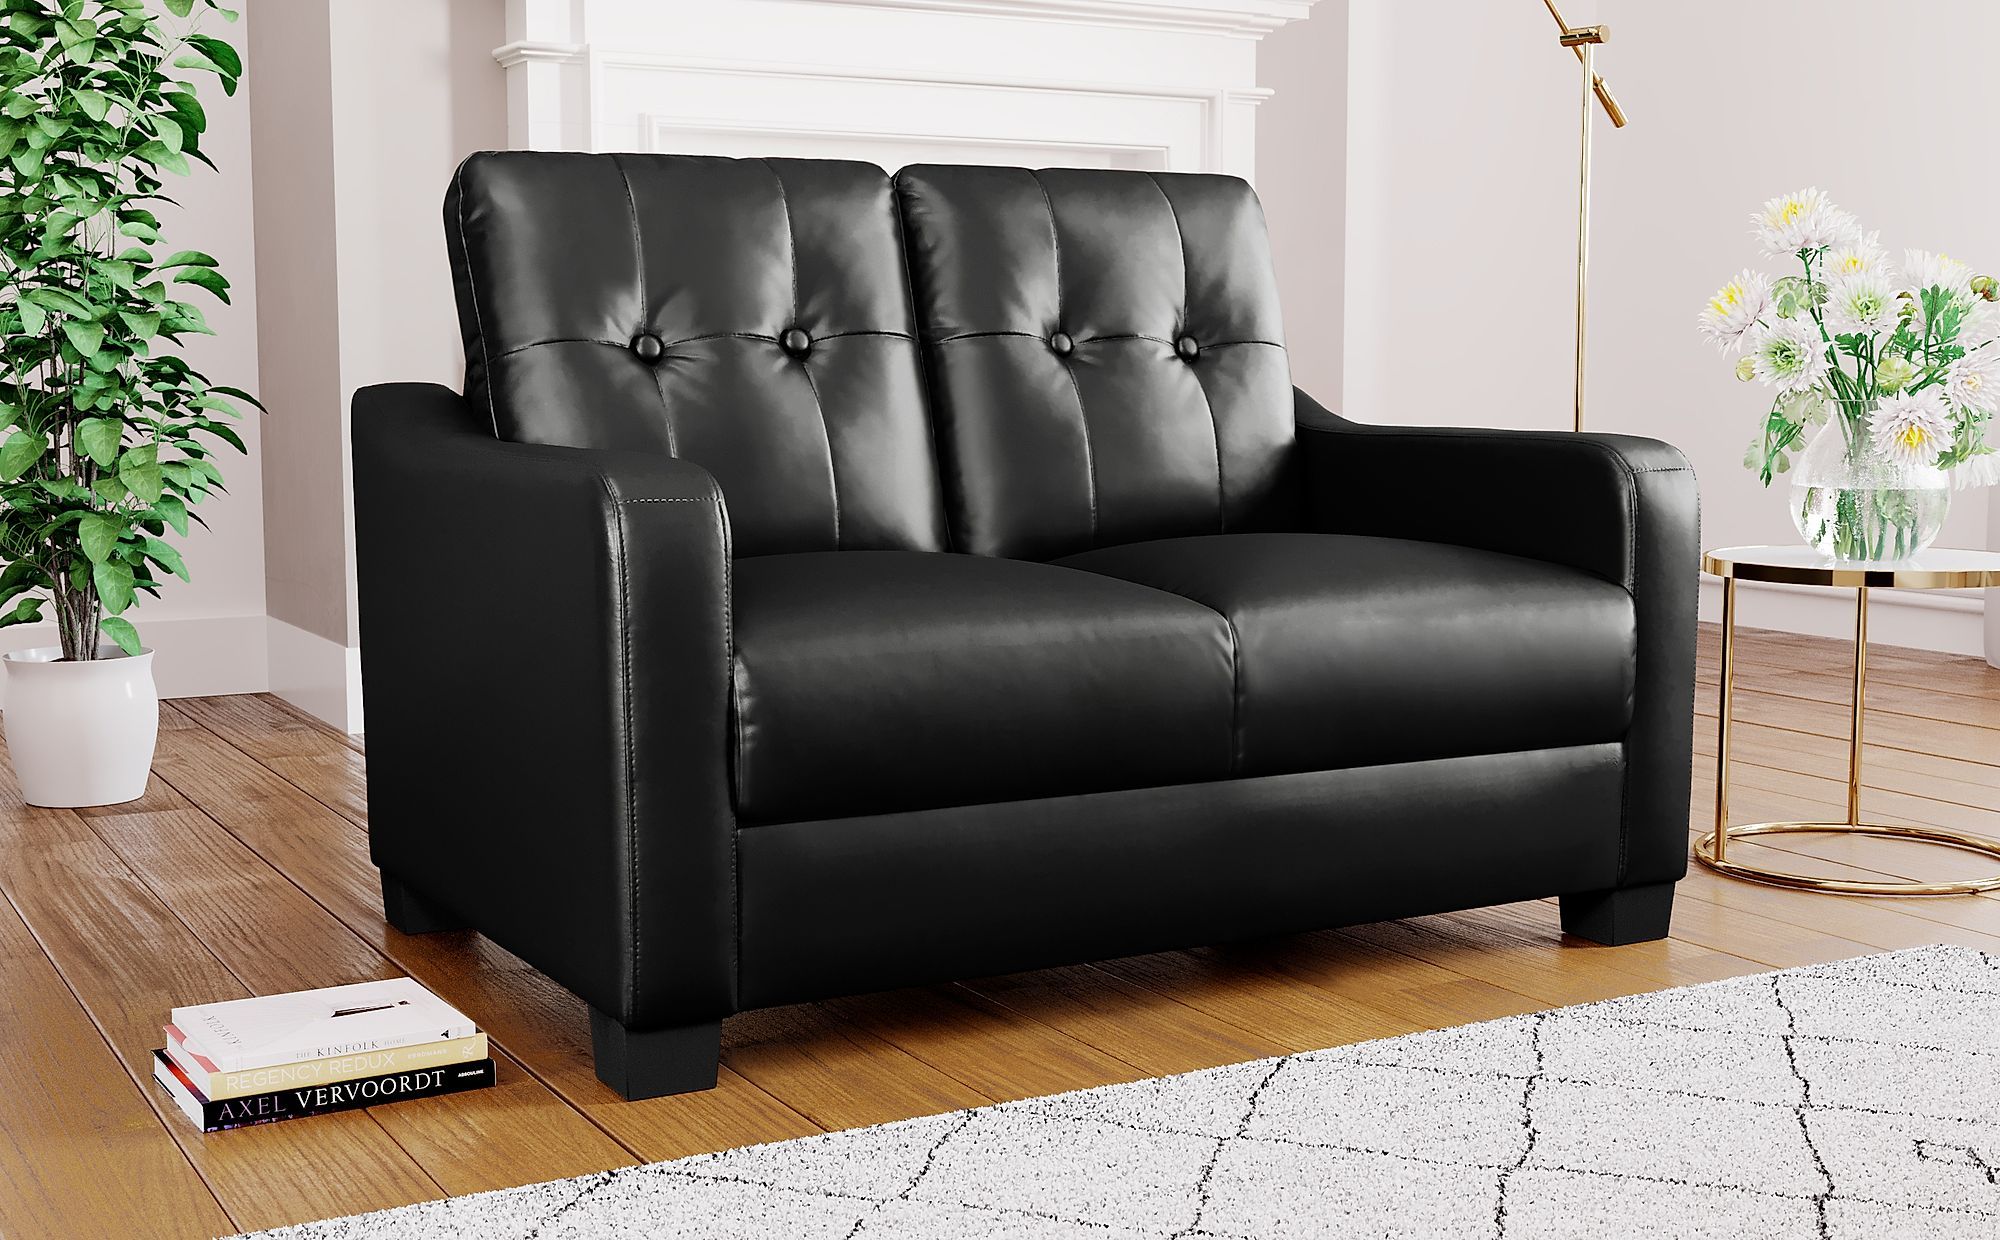 Belmont Black Leather 2 Seater Sofa | Furniture Choice Throughout Black Velvet 2 Seater Sofa Beds (View 8 of 20)